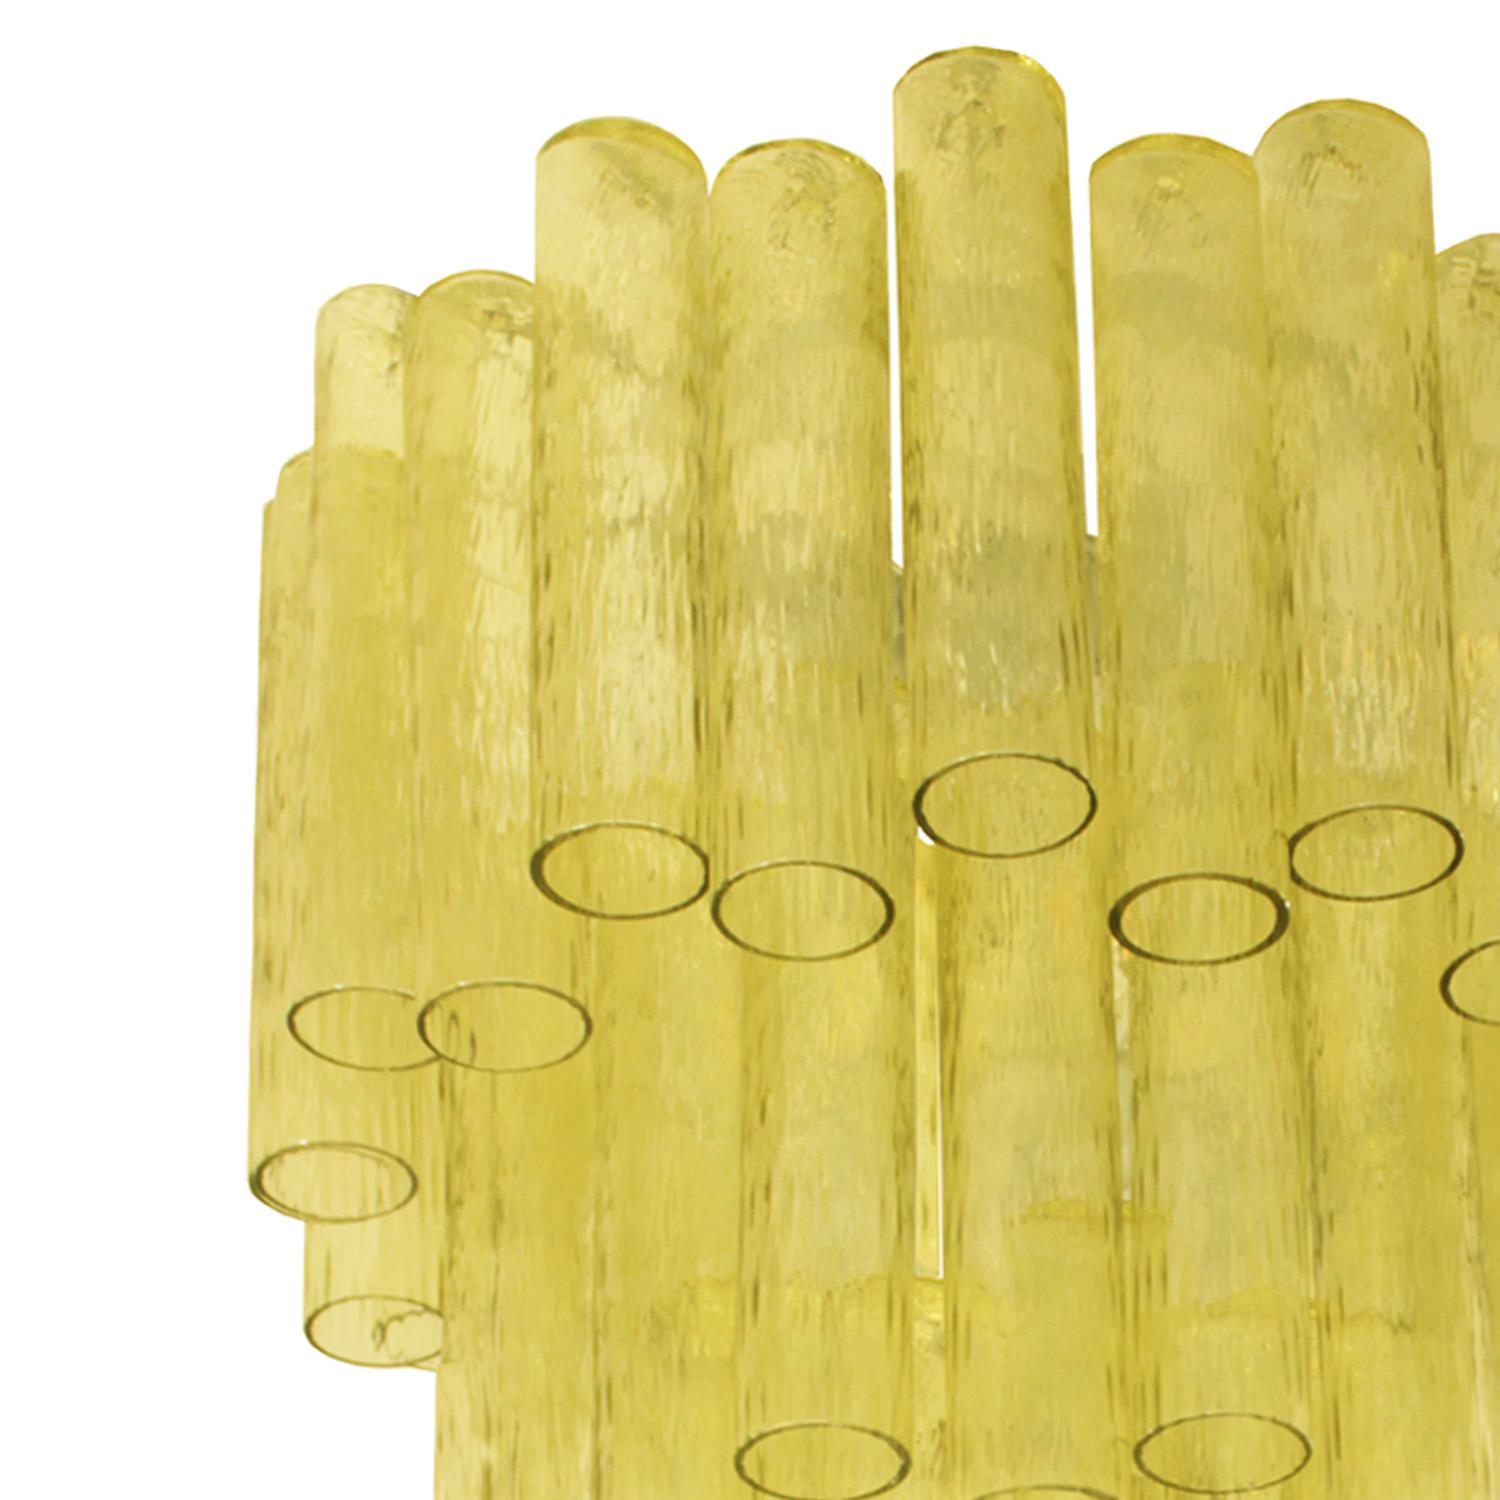 handcrafted tiered chandelier in mottled, cylindrical form vibrant chartreuse colored Murano glass by Venini. Italy, 1960s.

.